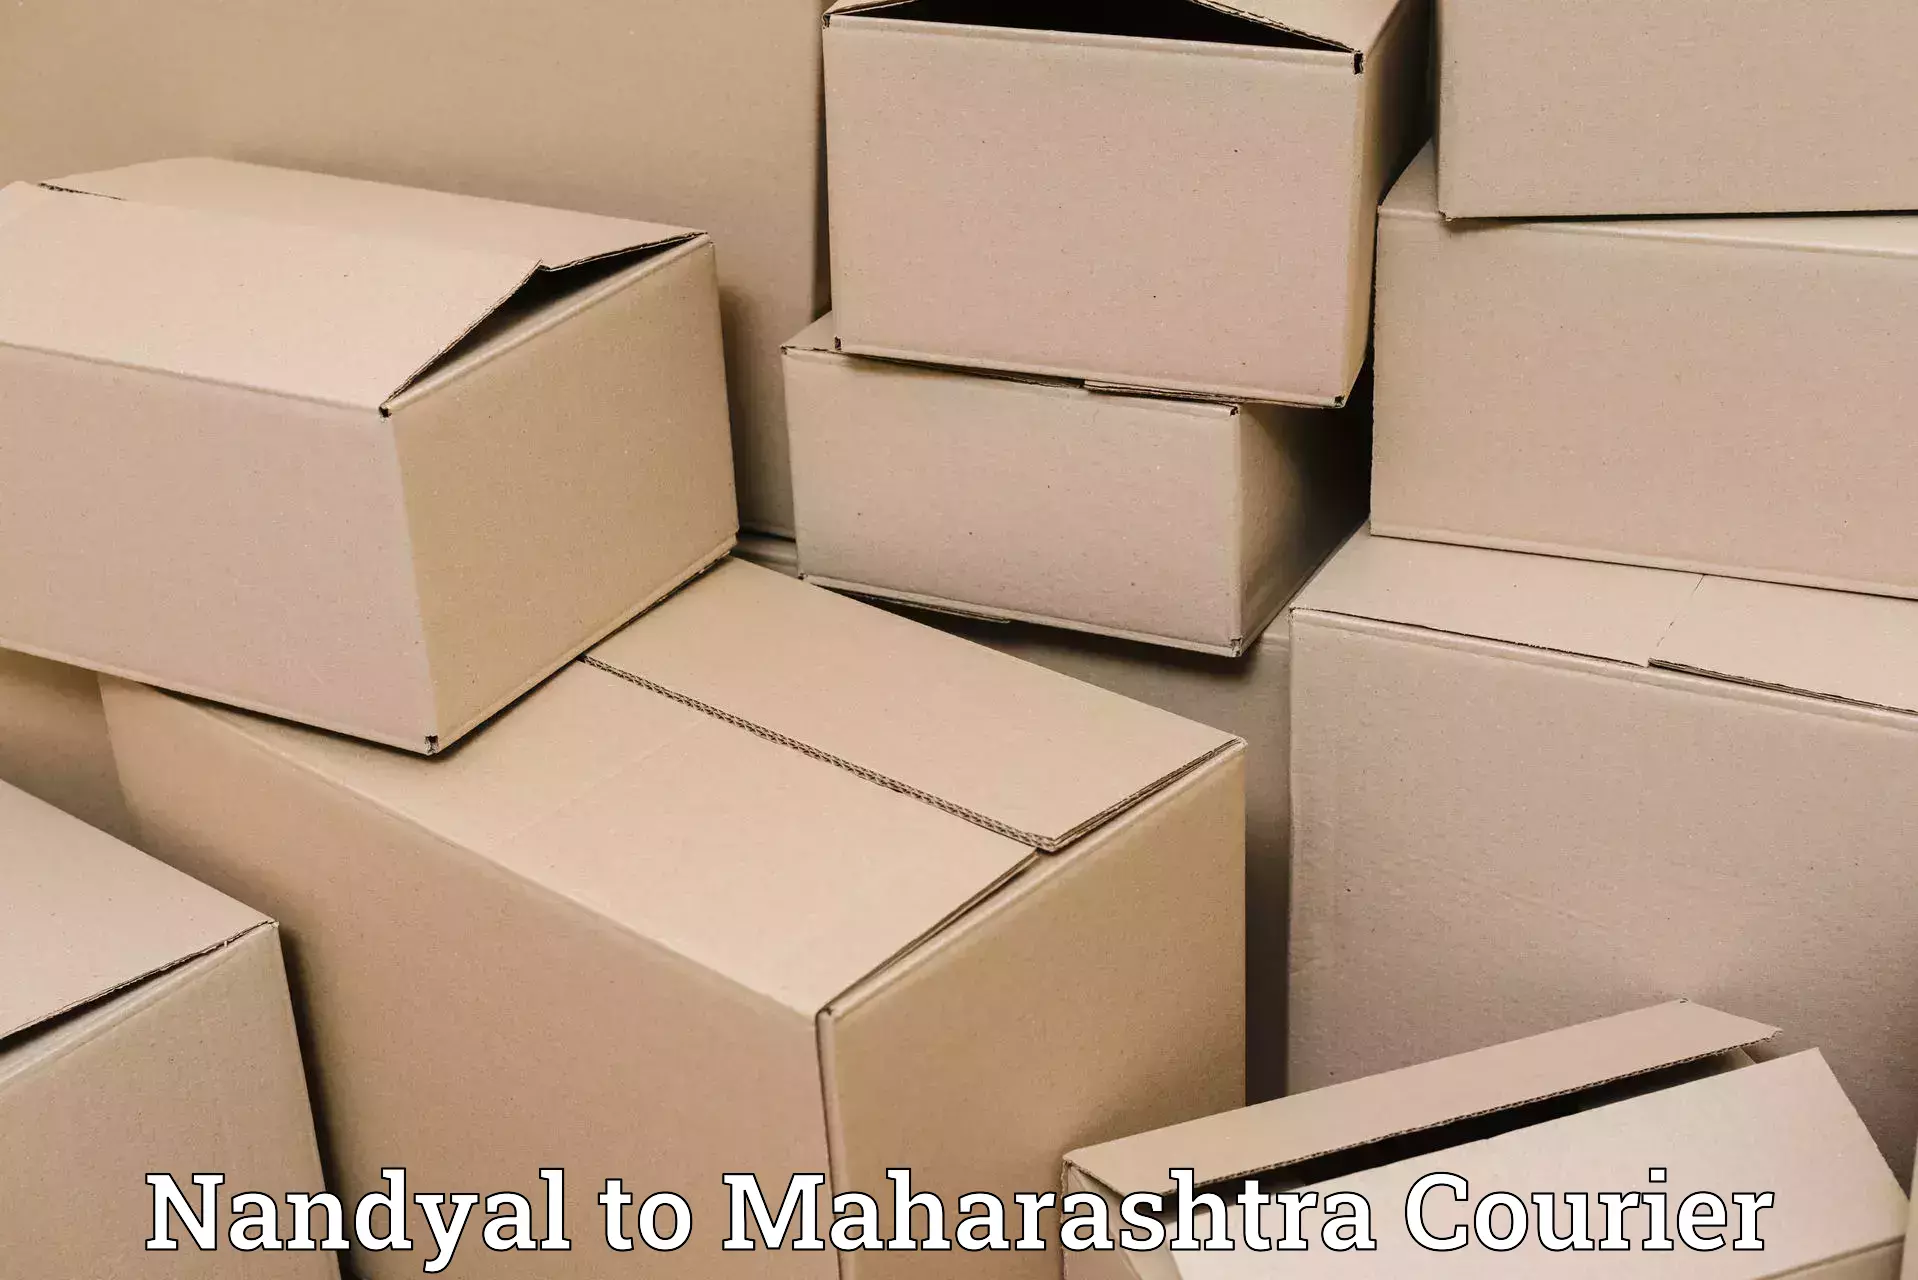 Personal courier services in Nandyal to Maharashtra